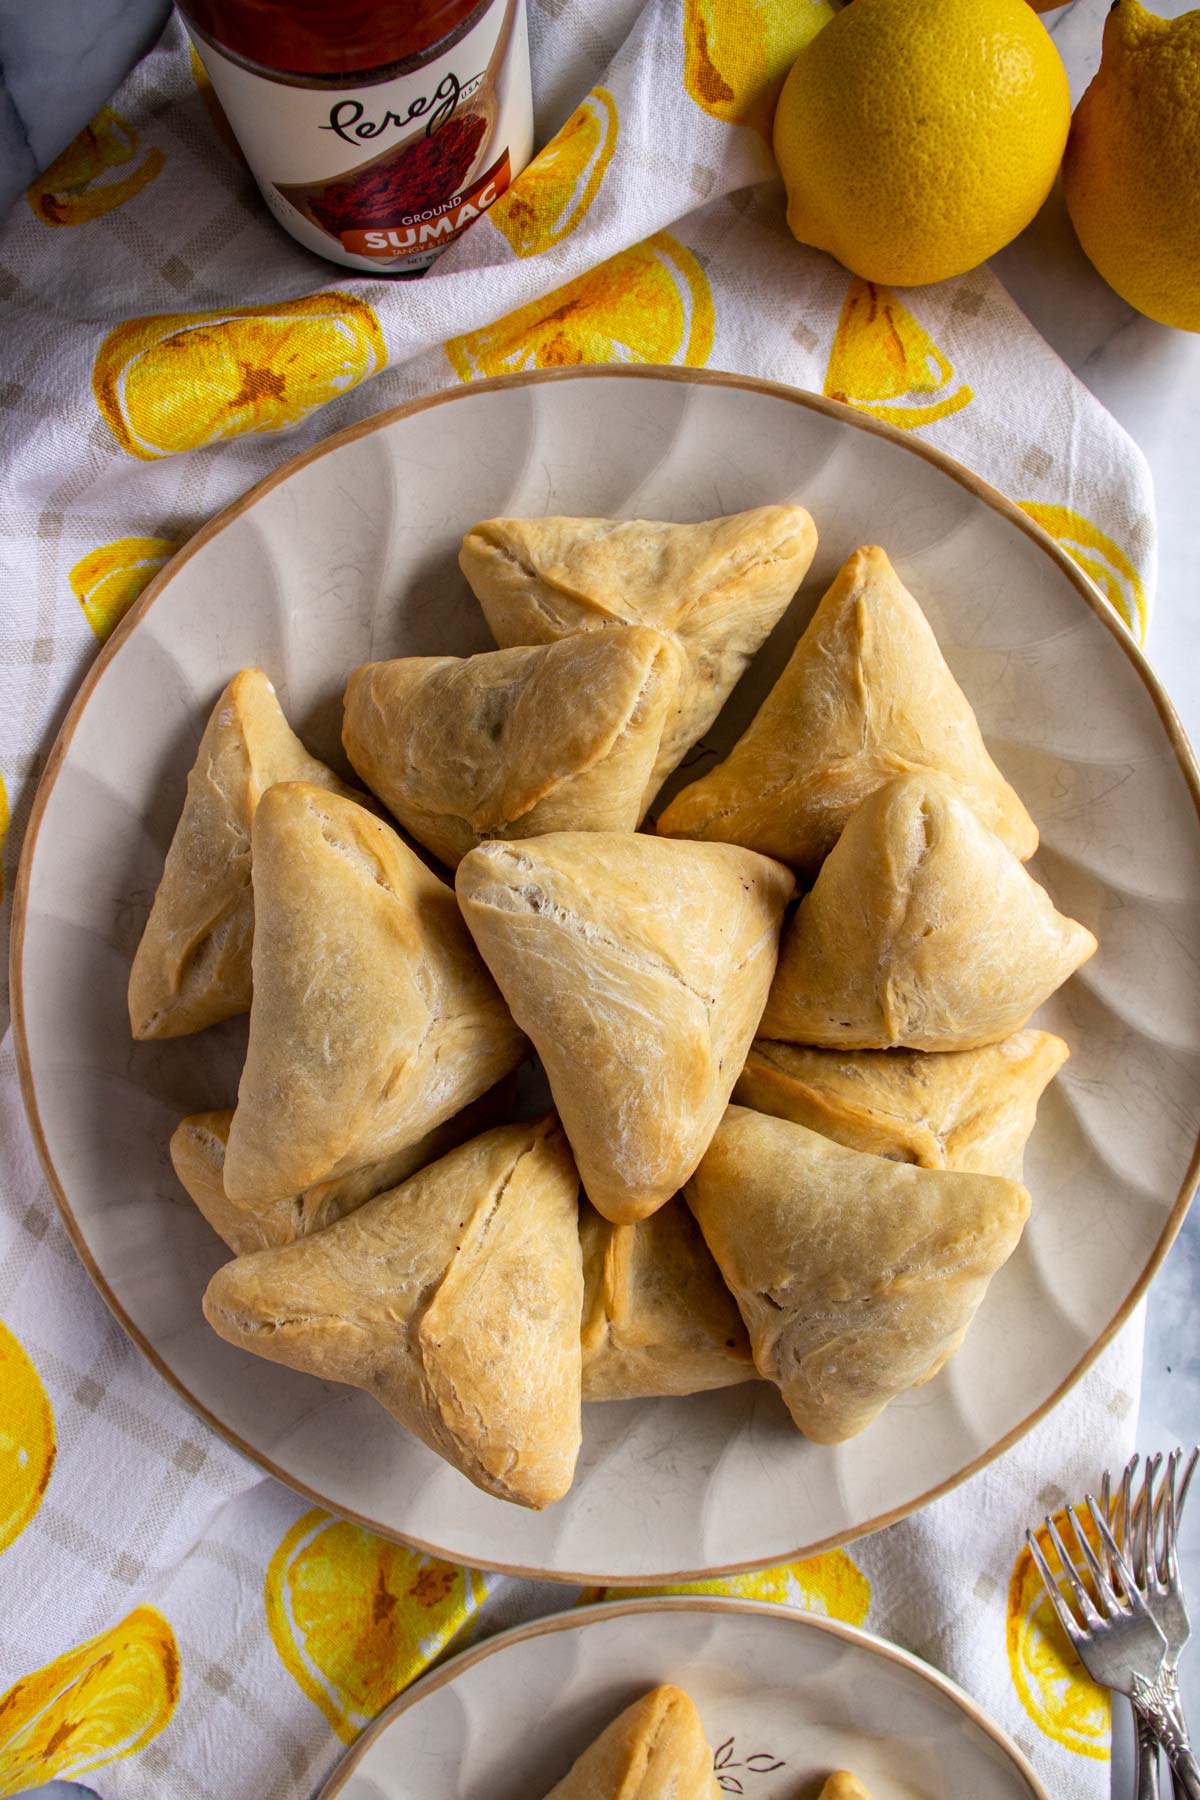 Triangular spinach fatayer pies on a round plate with lemons and sumac spice next to it.